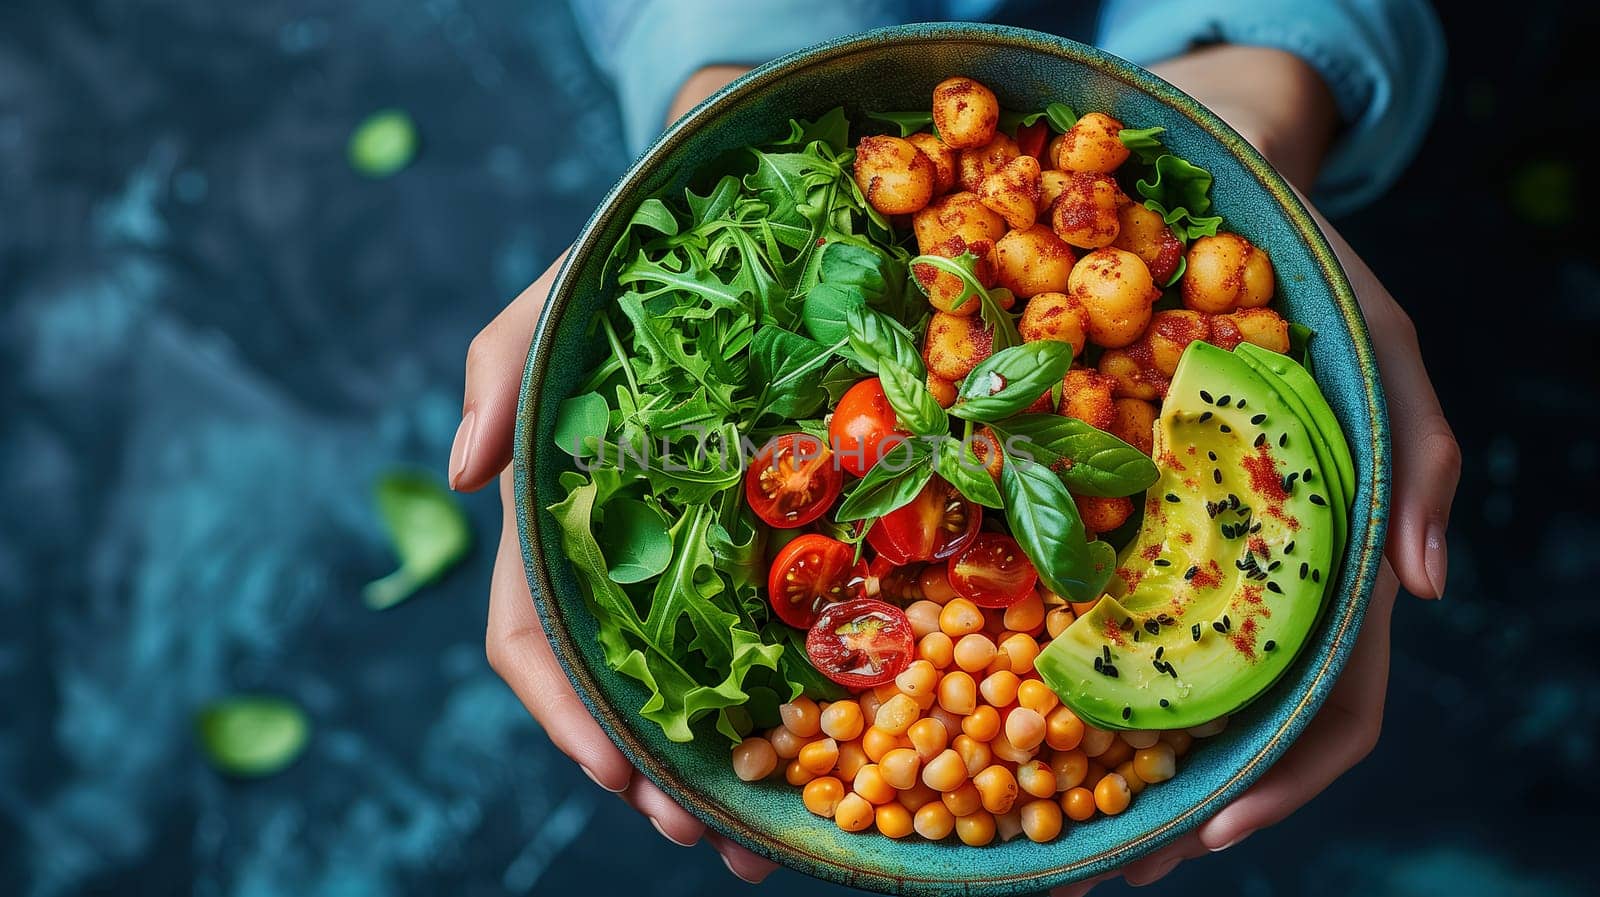 Person Holding a Bowl of Food With Avocado and Chickpeas by TRMK